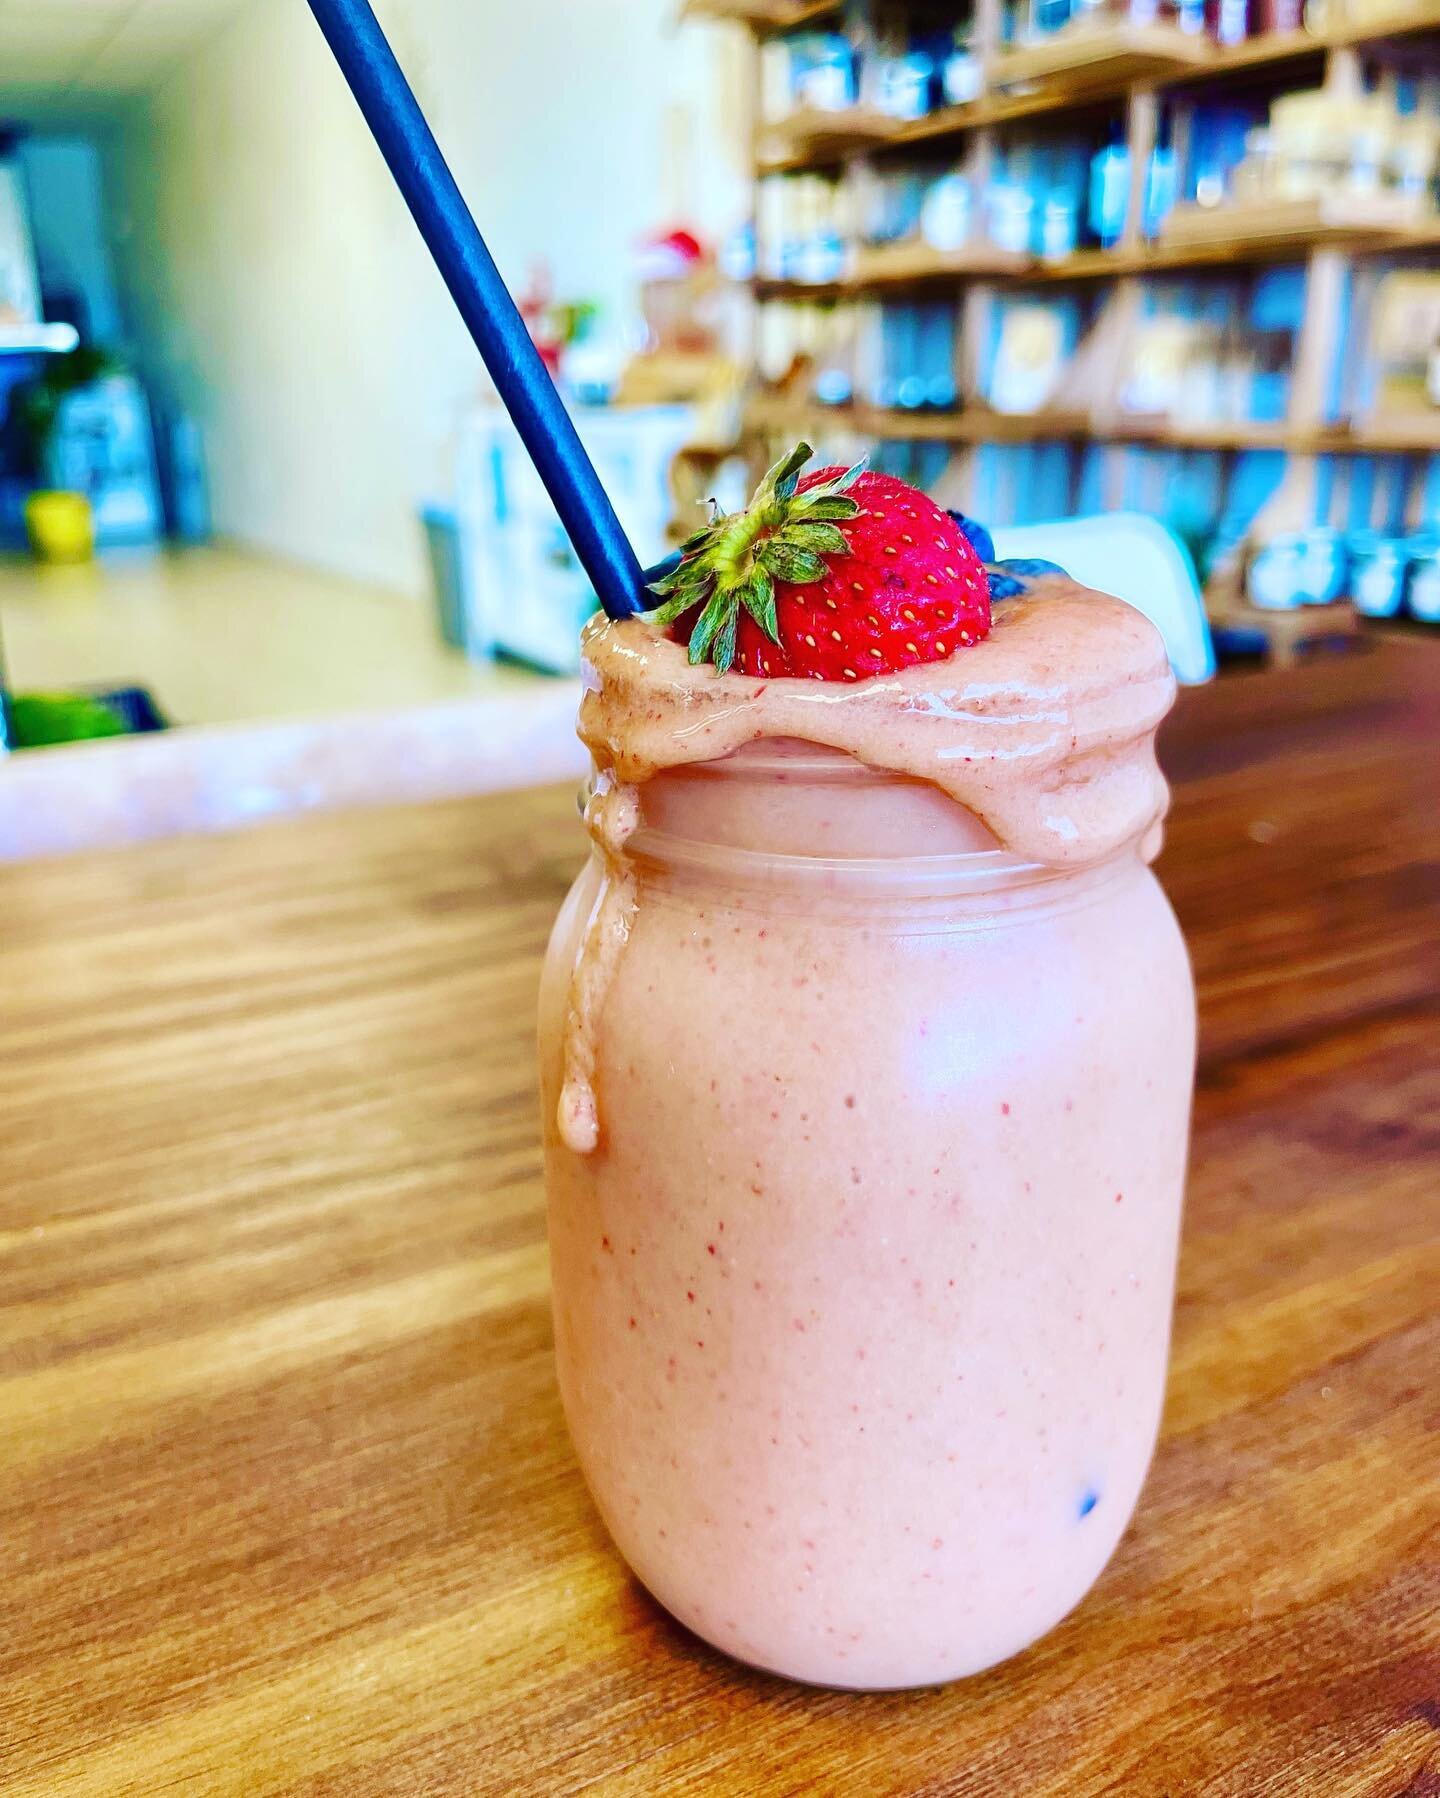 Probiotic Smoothies &hearts;️ 

Over 10 billions strains of probiotics, tons of beneficial bacteria, organic fruits, and any add ons: Full Spectrum CBD, Elderberry, Sea Moss, Fire Cider and so much more! 

No sugar, always vegan friendly too. 
Suppor